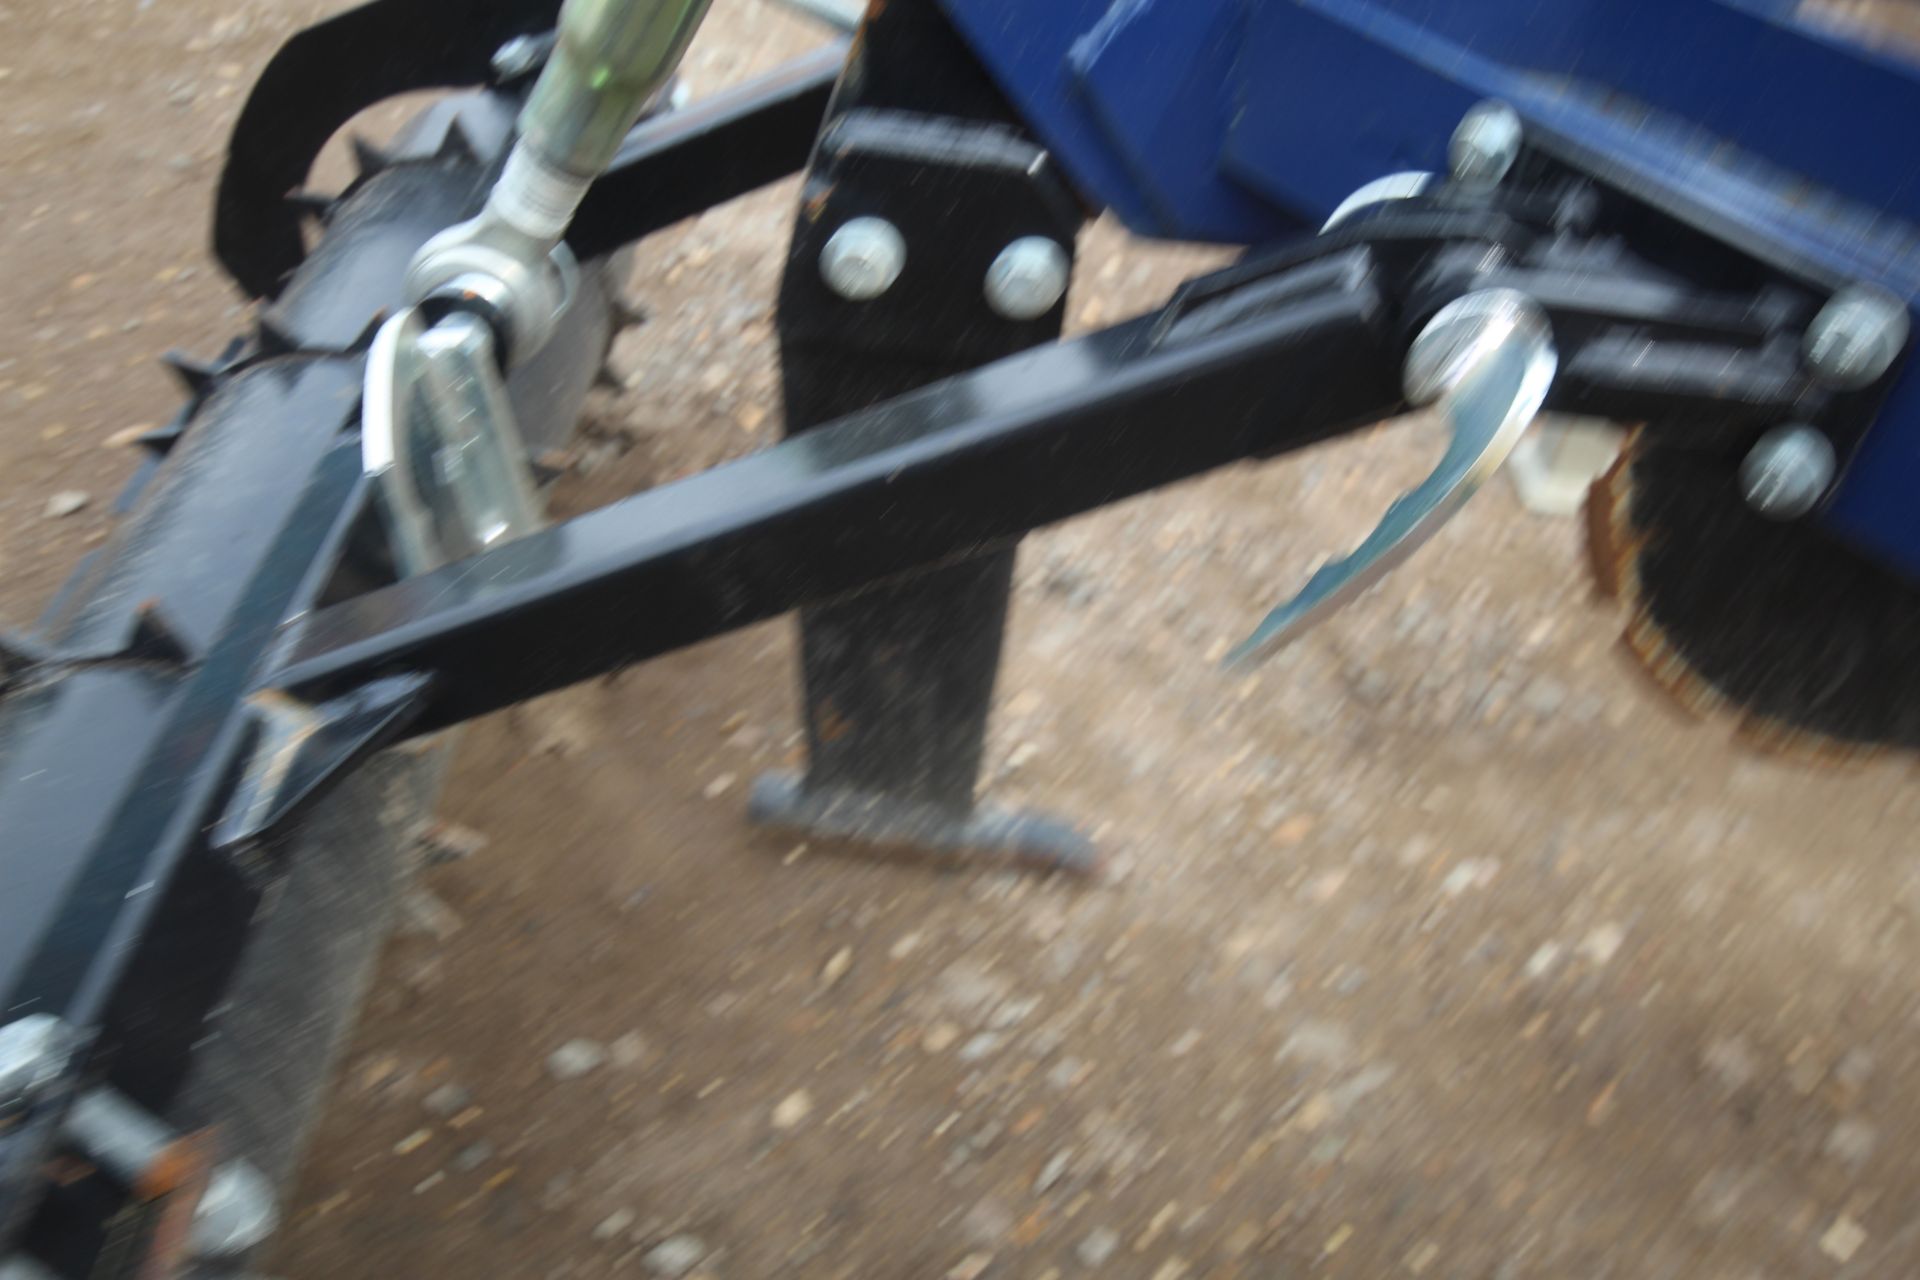 Single leg mole plough for compact tractor. With crumbler. Paperwork held. - Image 11 of 11